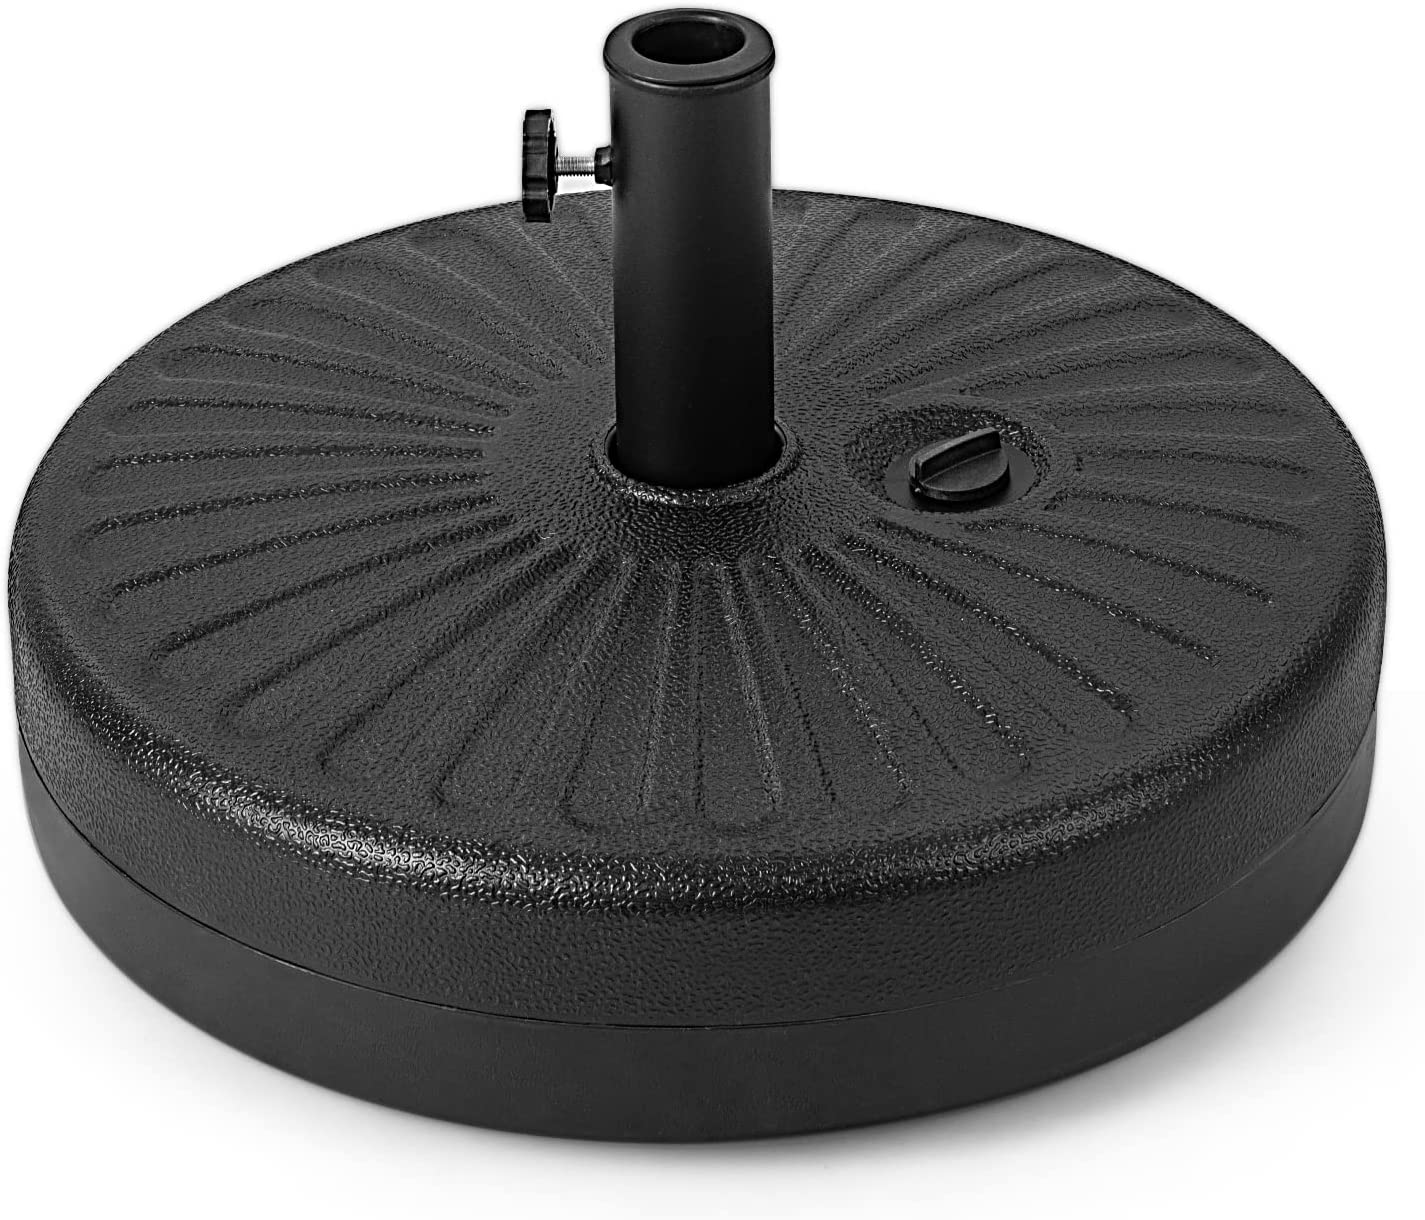 Giantex Fillable Umbrella Base, 18 inch Umbrella Stand Water and Sand Filled